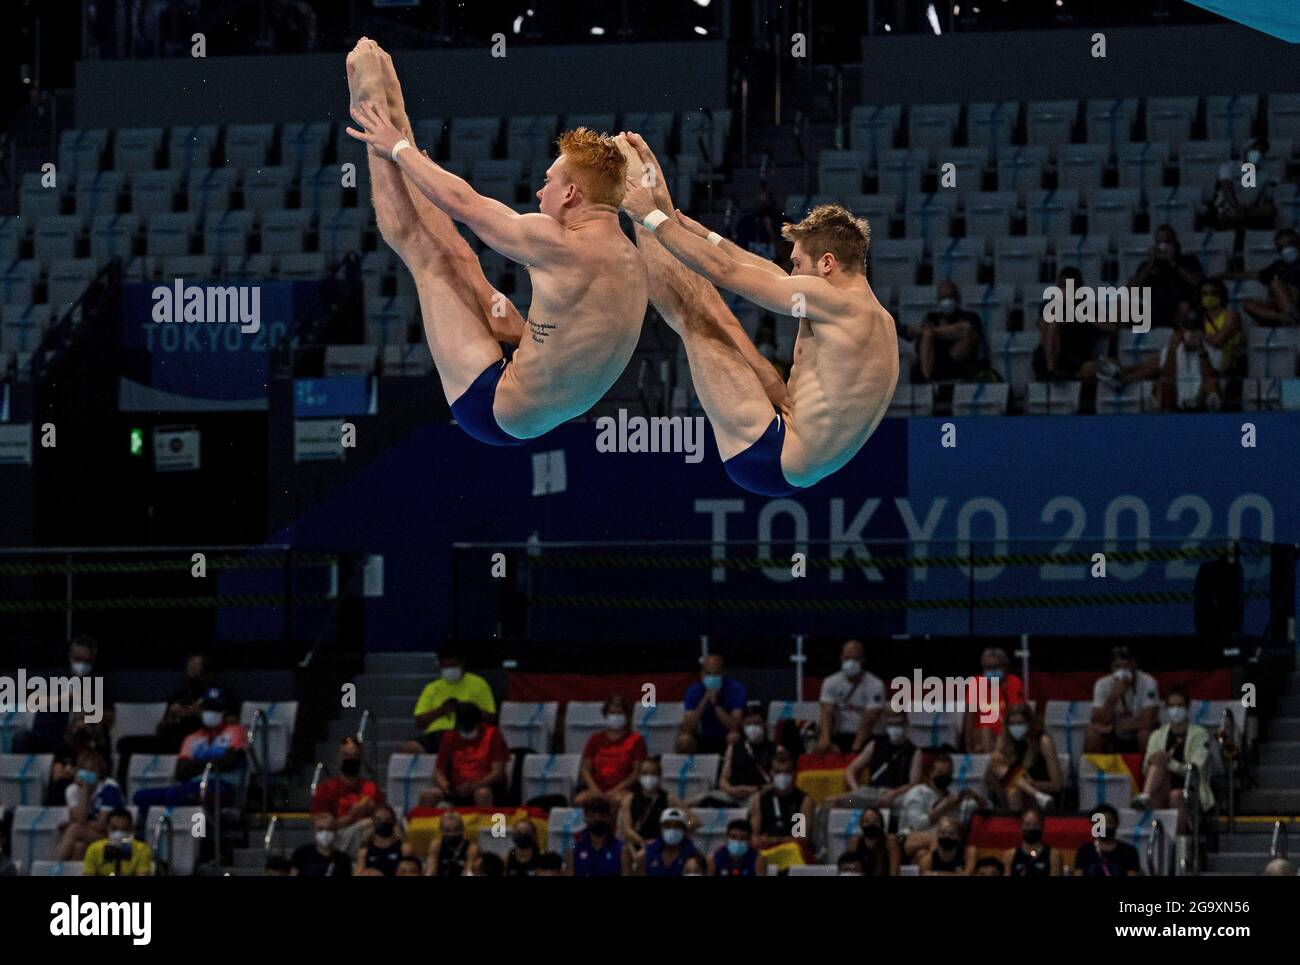 Arlake Gymnastics Center, Tokyo, Japan. 27th July, 2021. Womens Team Artistic Gymnastics, Day 4 of Tokyo 2020 Summer Olympic Games; USA divers Andrew Capobianco and Michael Hixon Credit: Action Plus Sports/Alamy Live News Stock Photo